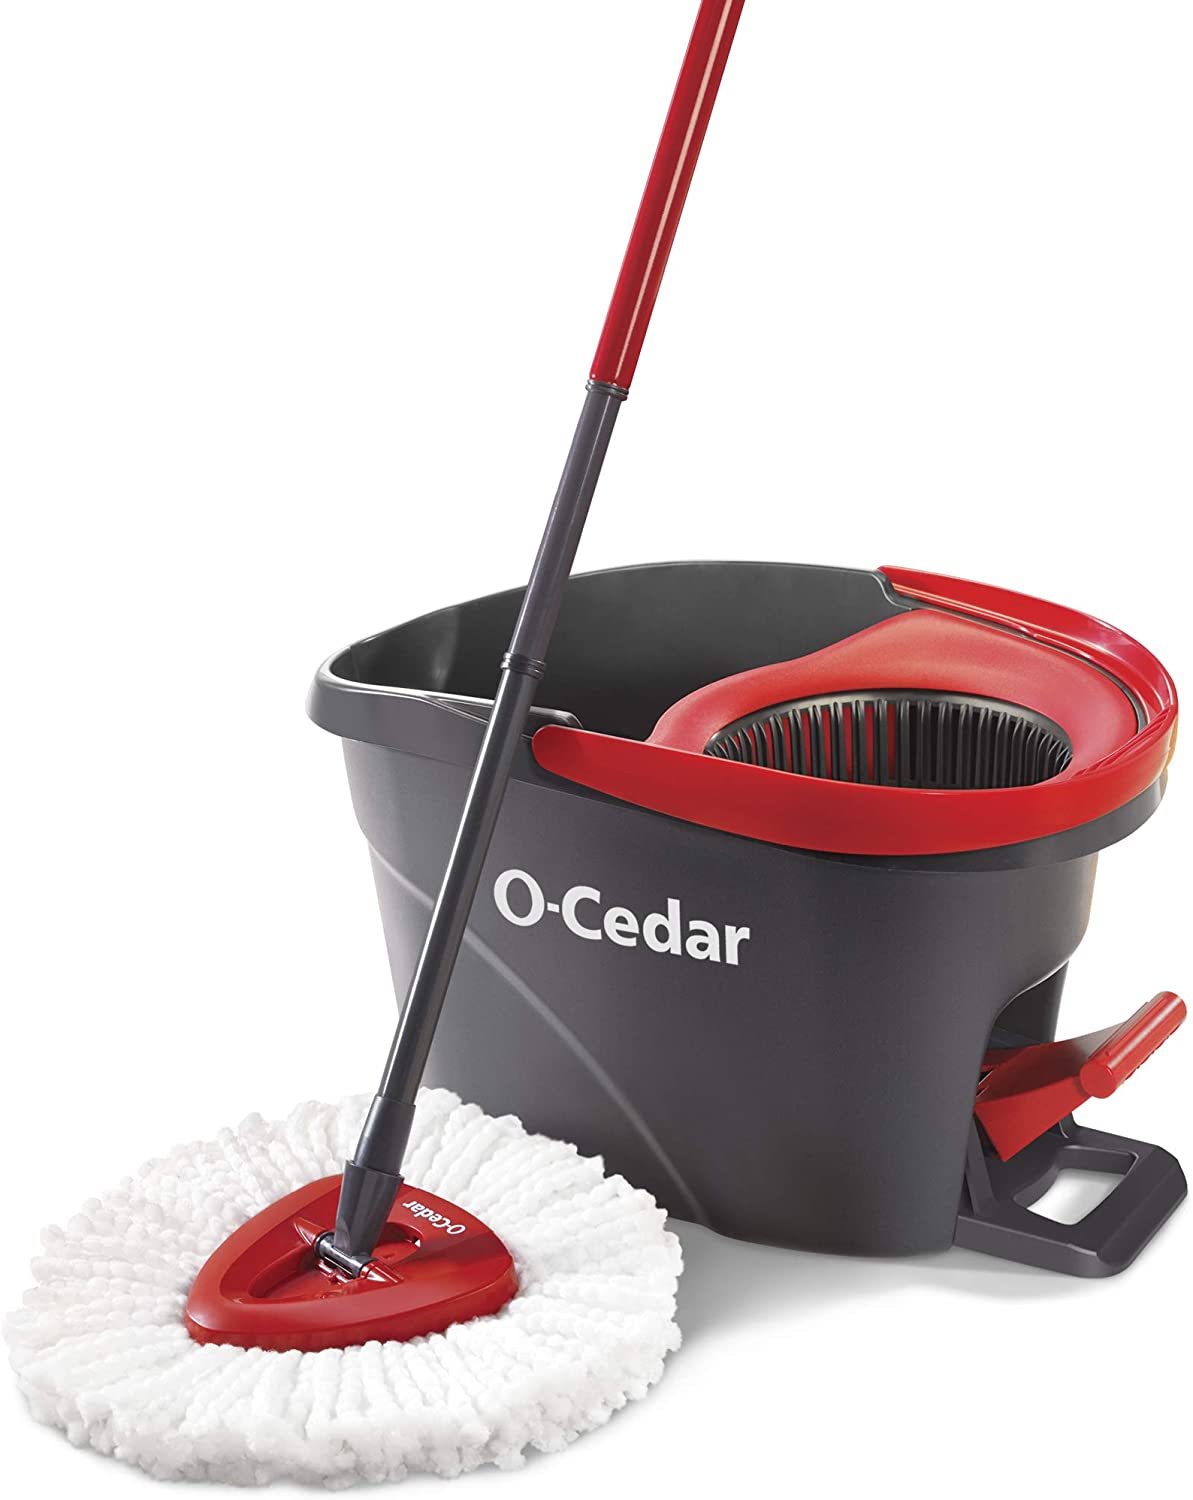 O-Cedar EasyWring Microfiber Spin Mop, Bucket Floor Cleaning System, Red, Gray 21